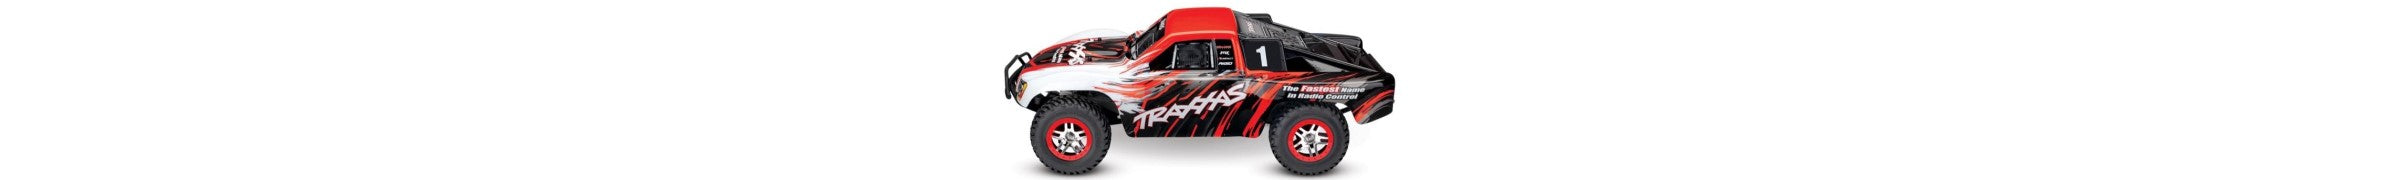 Parts For 68086-4 Traxxas Slash VXL 1/10 4WD Brushless Short Course Truck